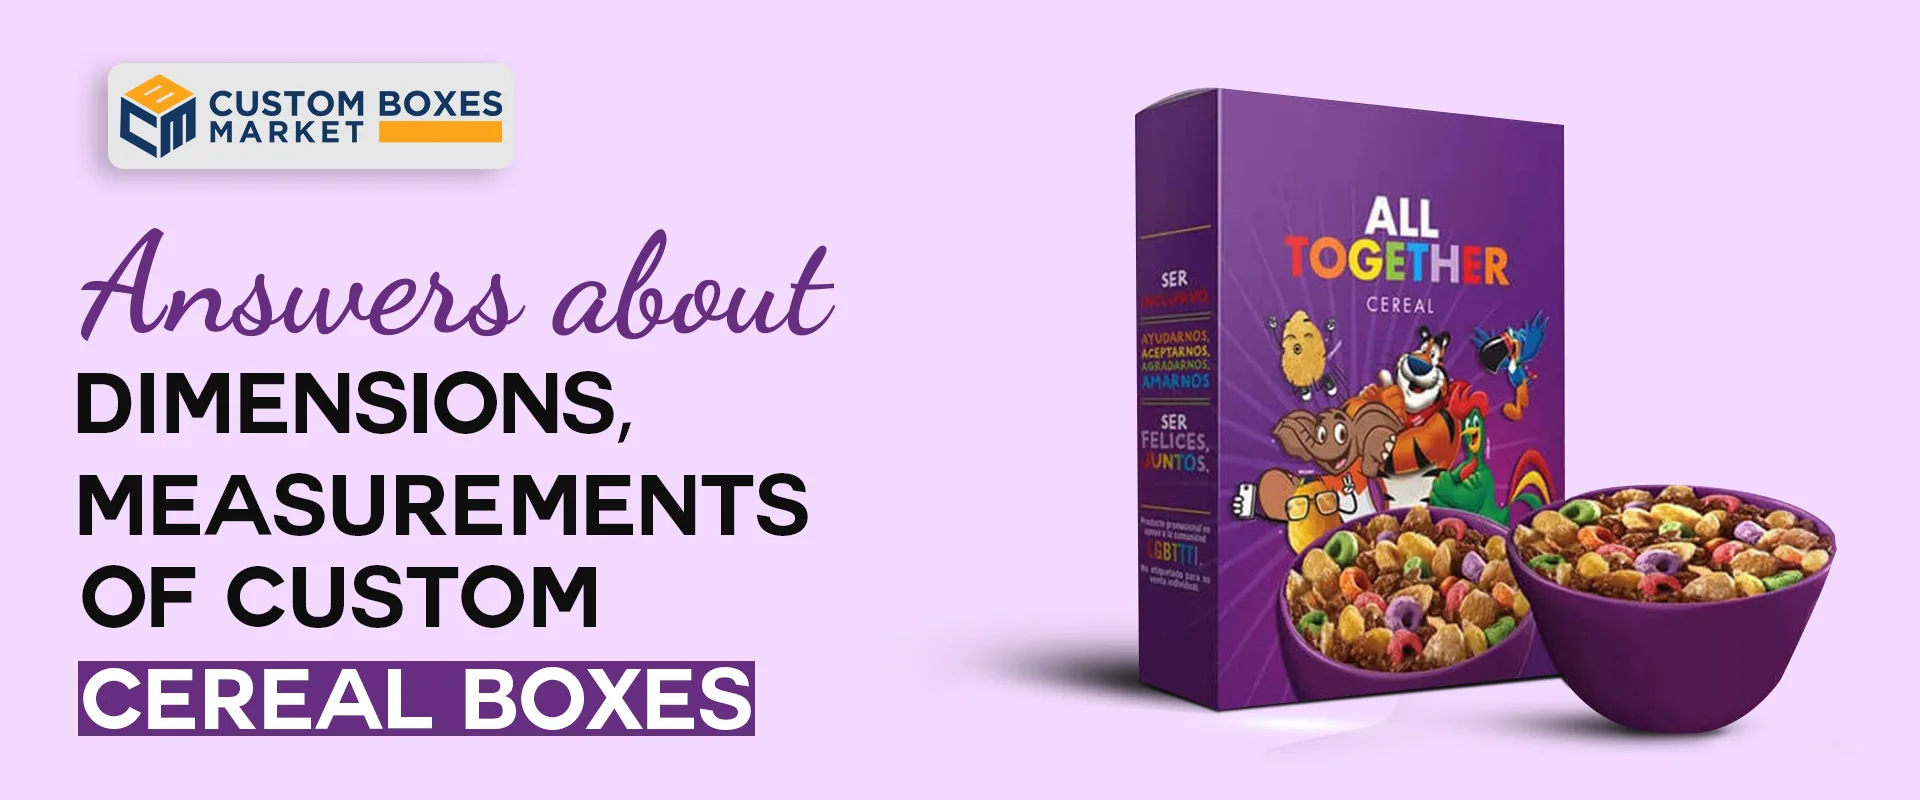 Answers About Box of Cereal Dimensions, Measurements of a Cereal Box & More!